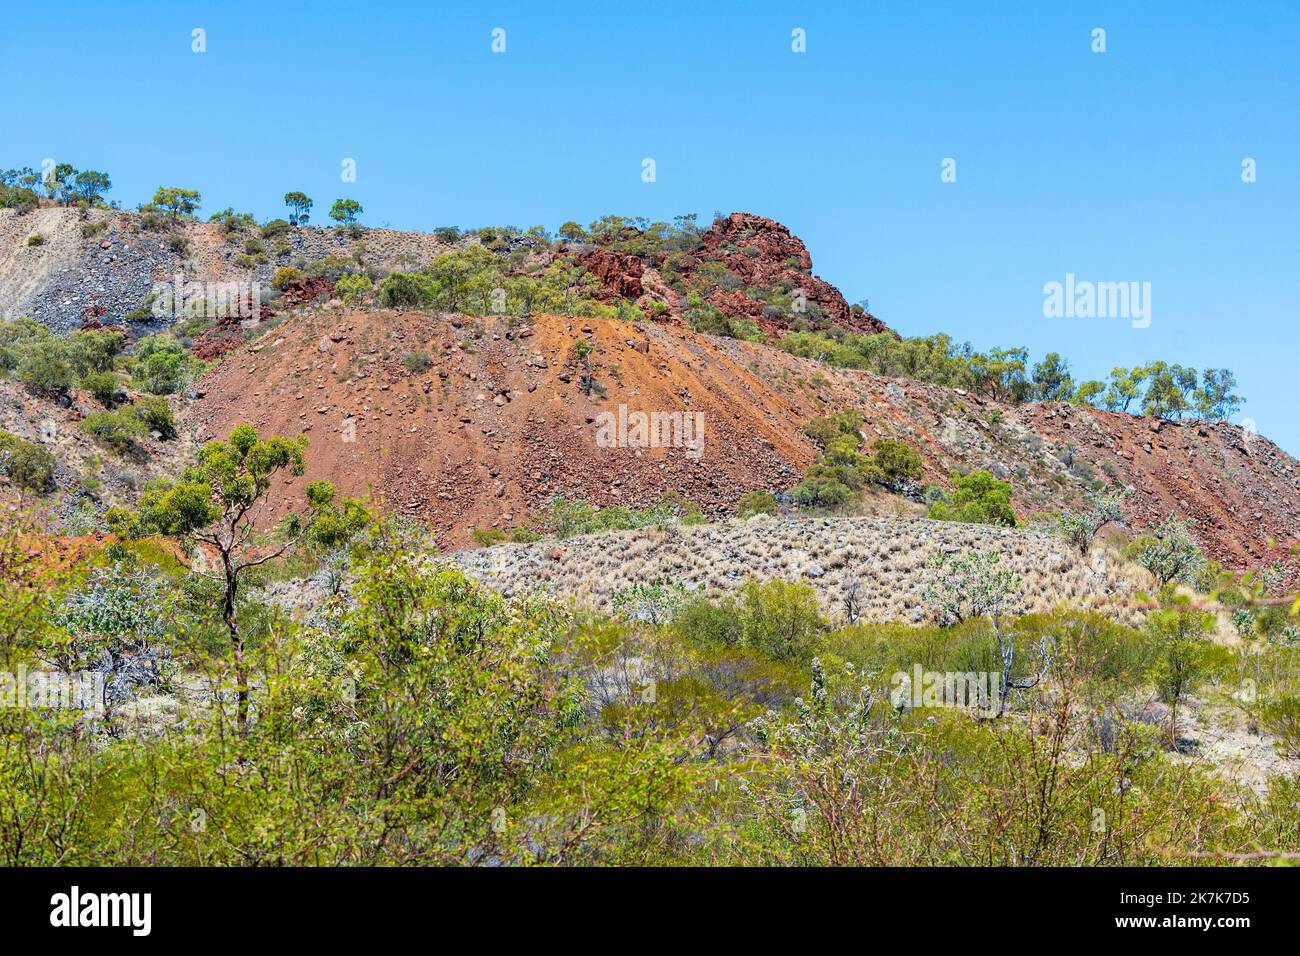 Mining spoils at the abandonned Mary Kathleen uranium mine, Selwyn Range, between Mount Isa and Cloncurry, North Western Queensland, QLD, Australia Stock Photo